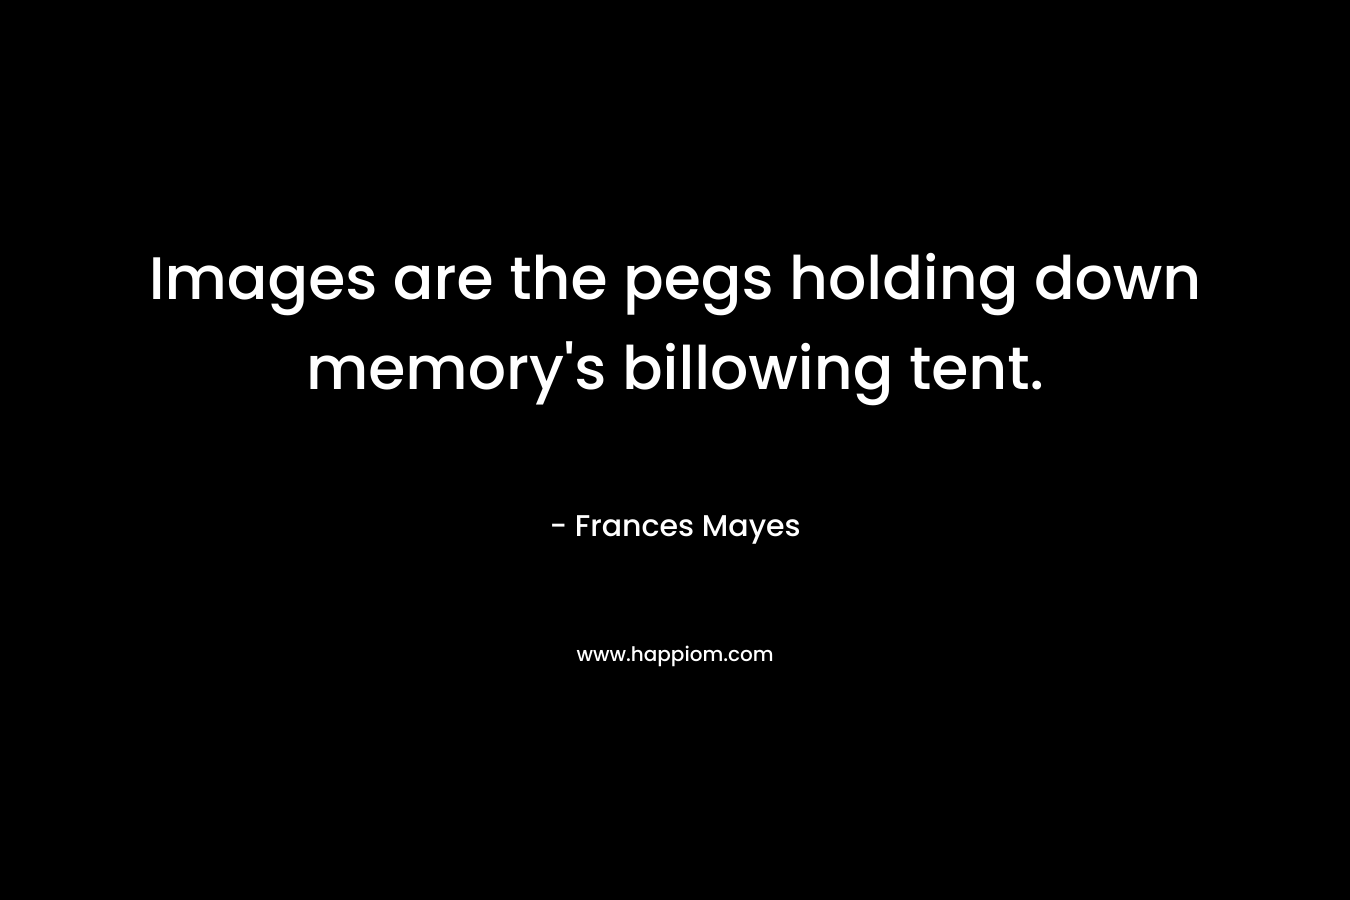 Images are the pegs holding down memory’s billowing tent. – Frances Mayes